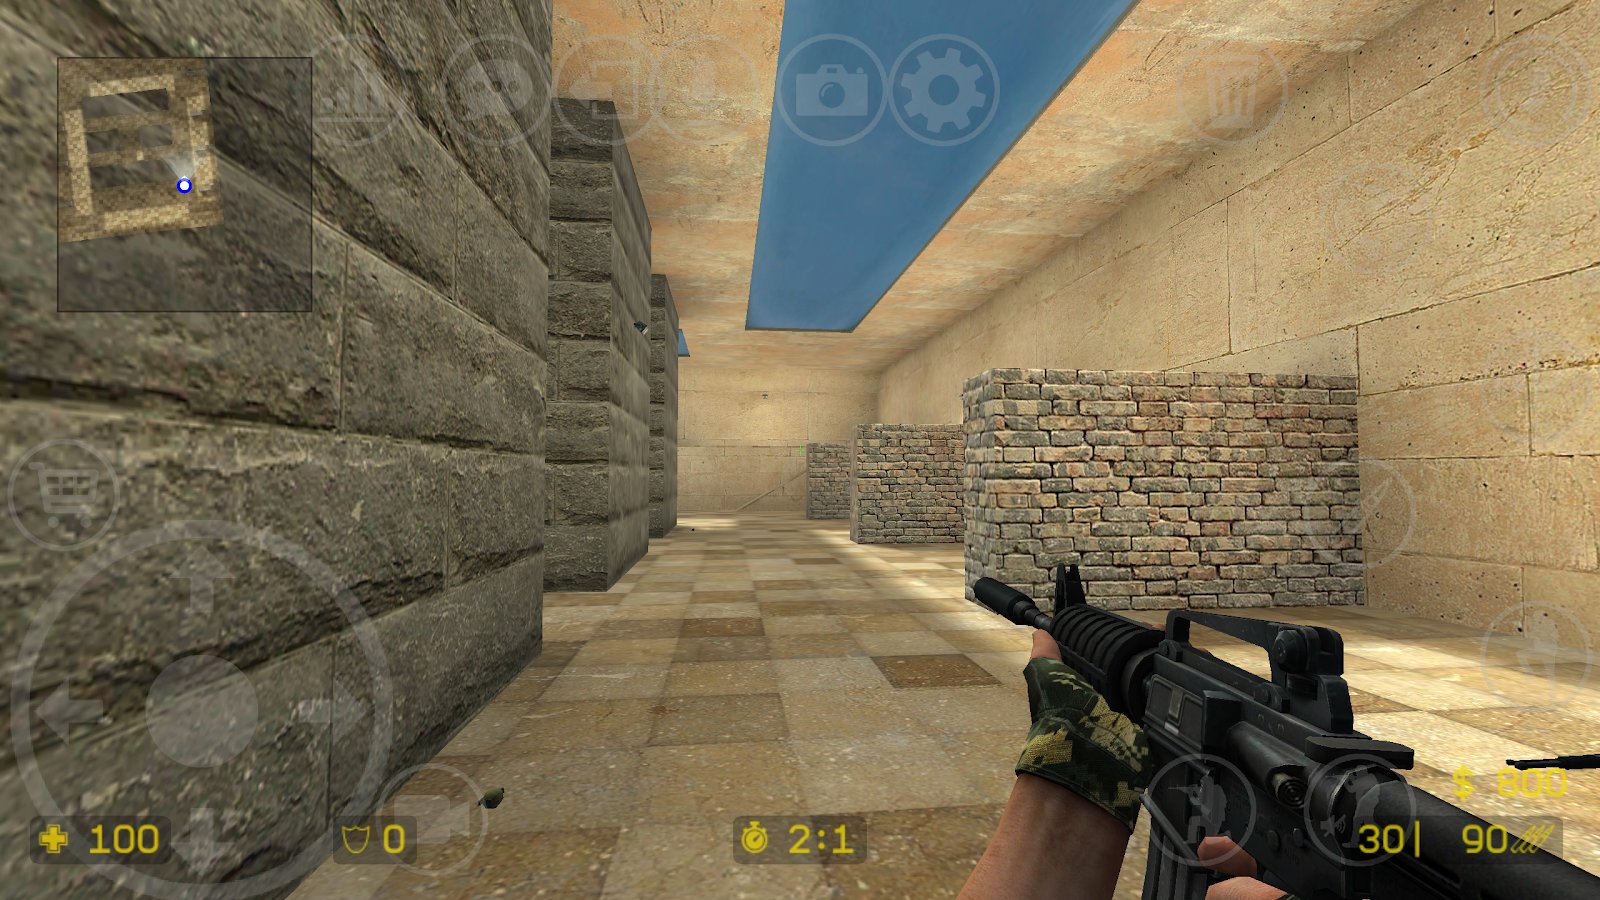 Download Counter-Strike: Source for Android